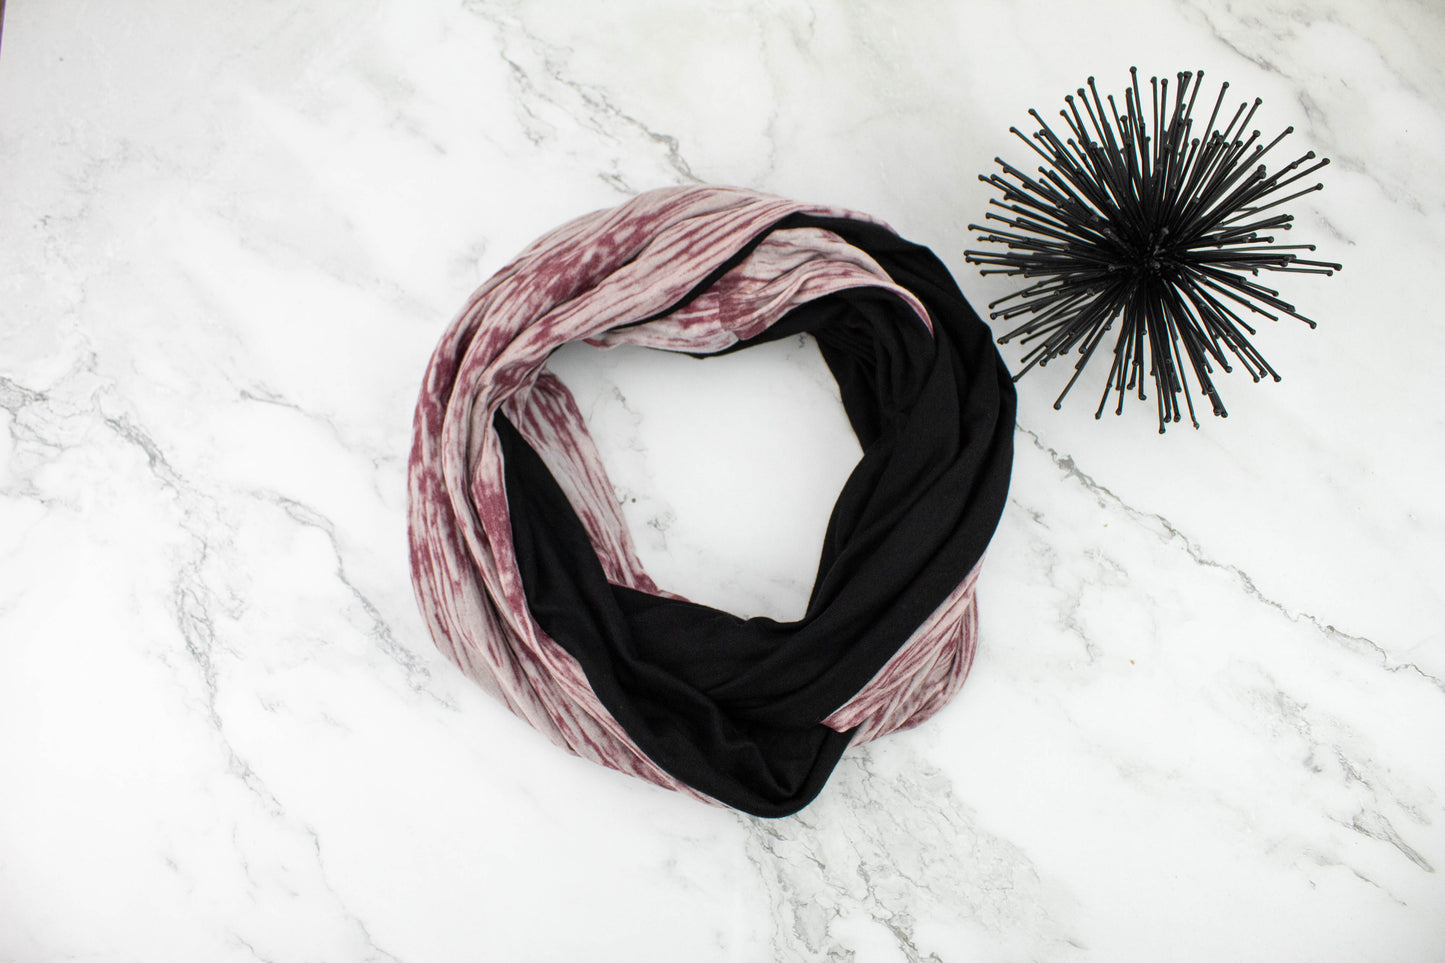 Brick Red and Black Burnout Knit Infinity Scarf